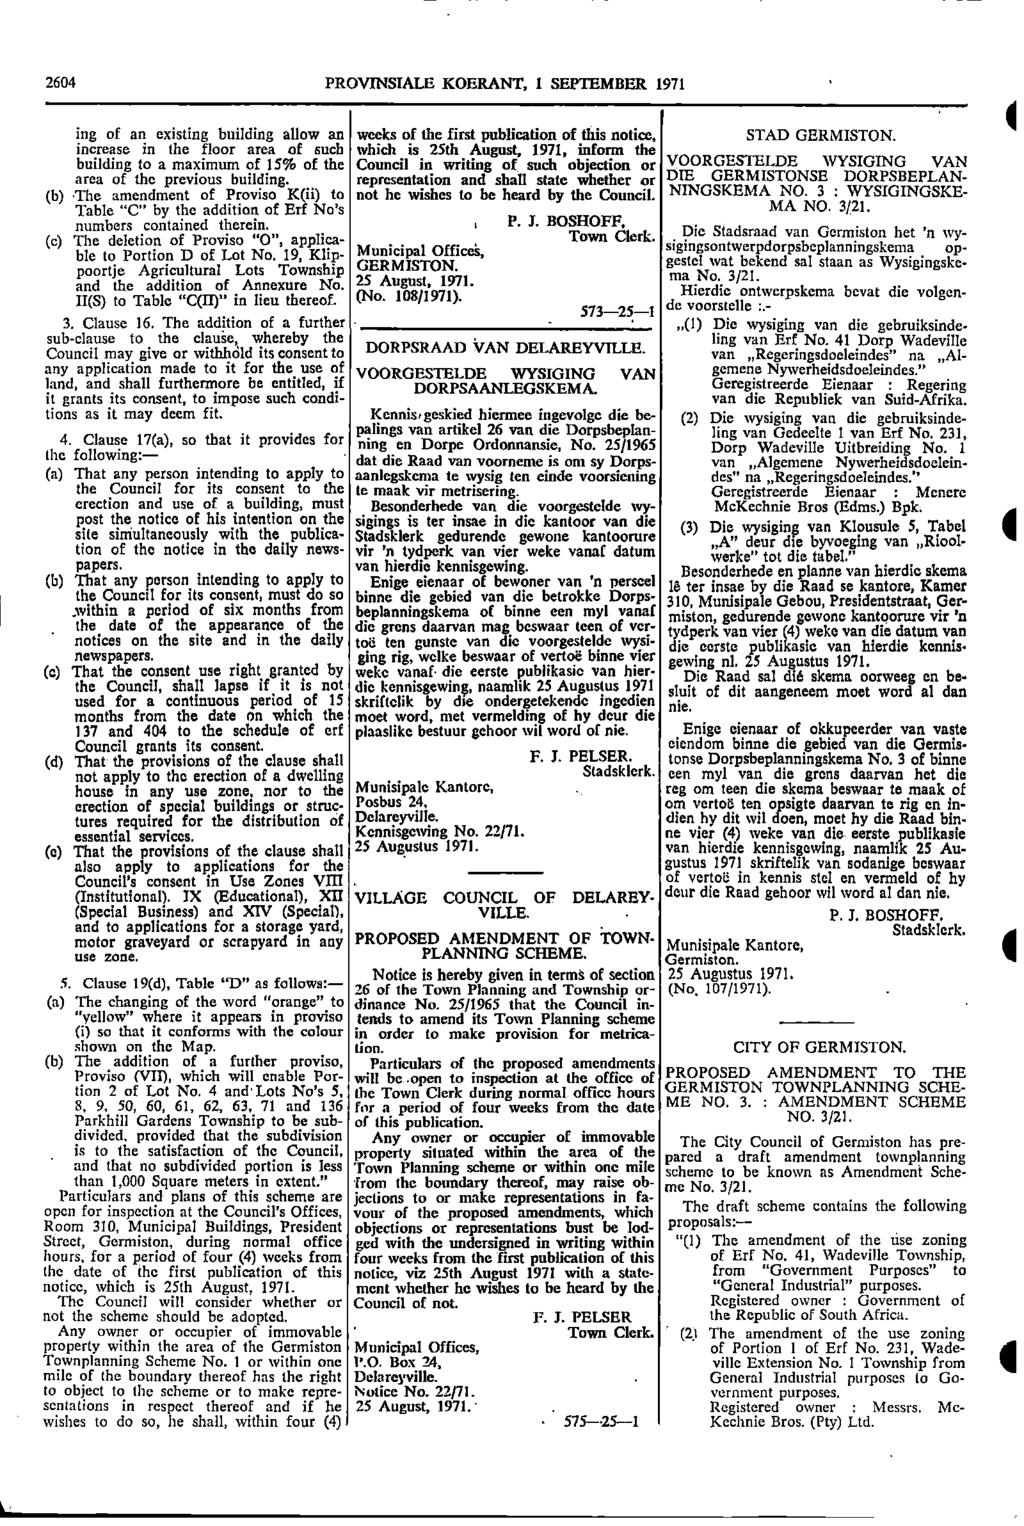 the 2604 PROVNSALE KOERANT, SEPTEMBER 97 ing of an existing building allow an weeks of the first publication of this notice, STAD GERMSTON increase in the floor area of such which is 25th August, 97,